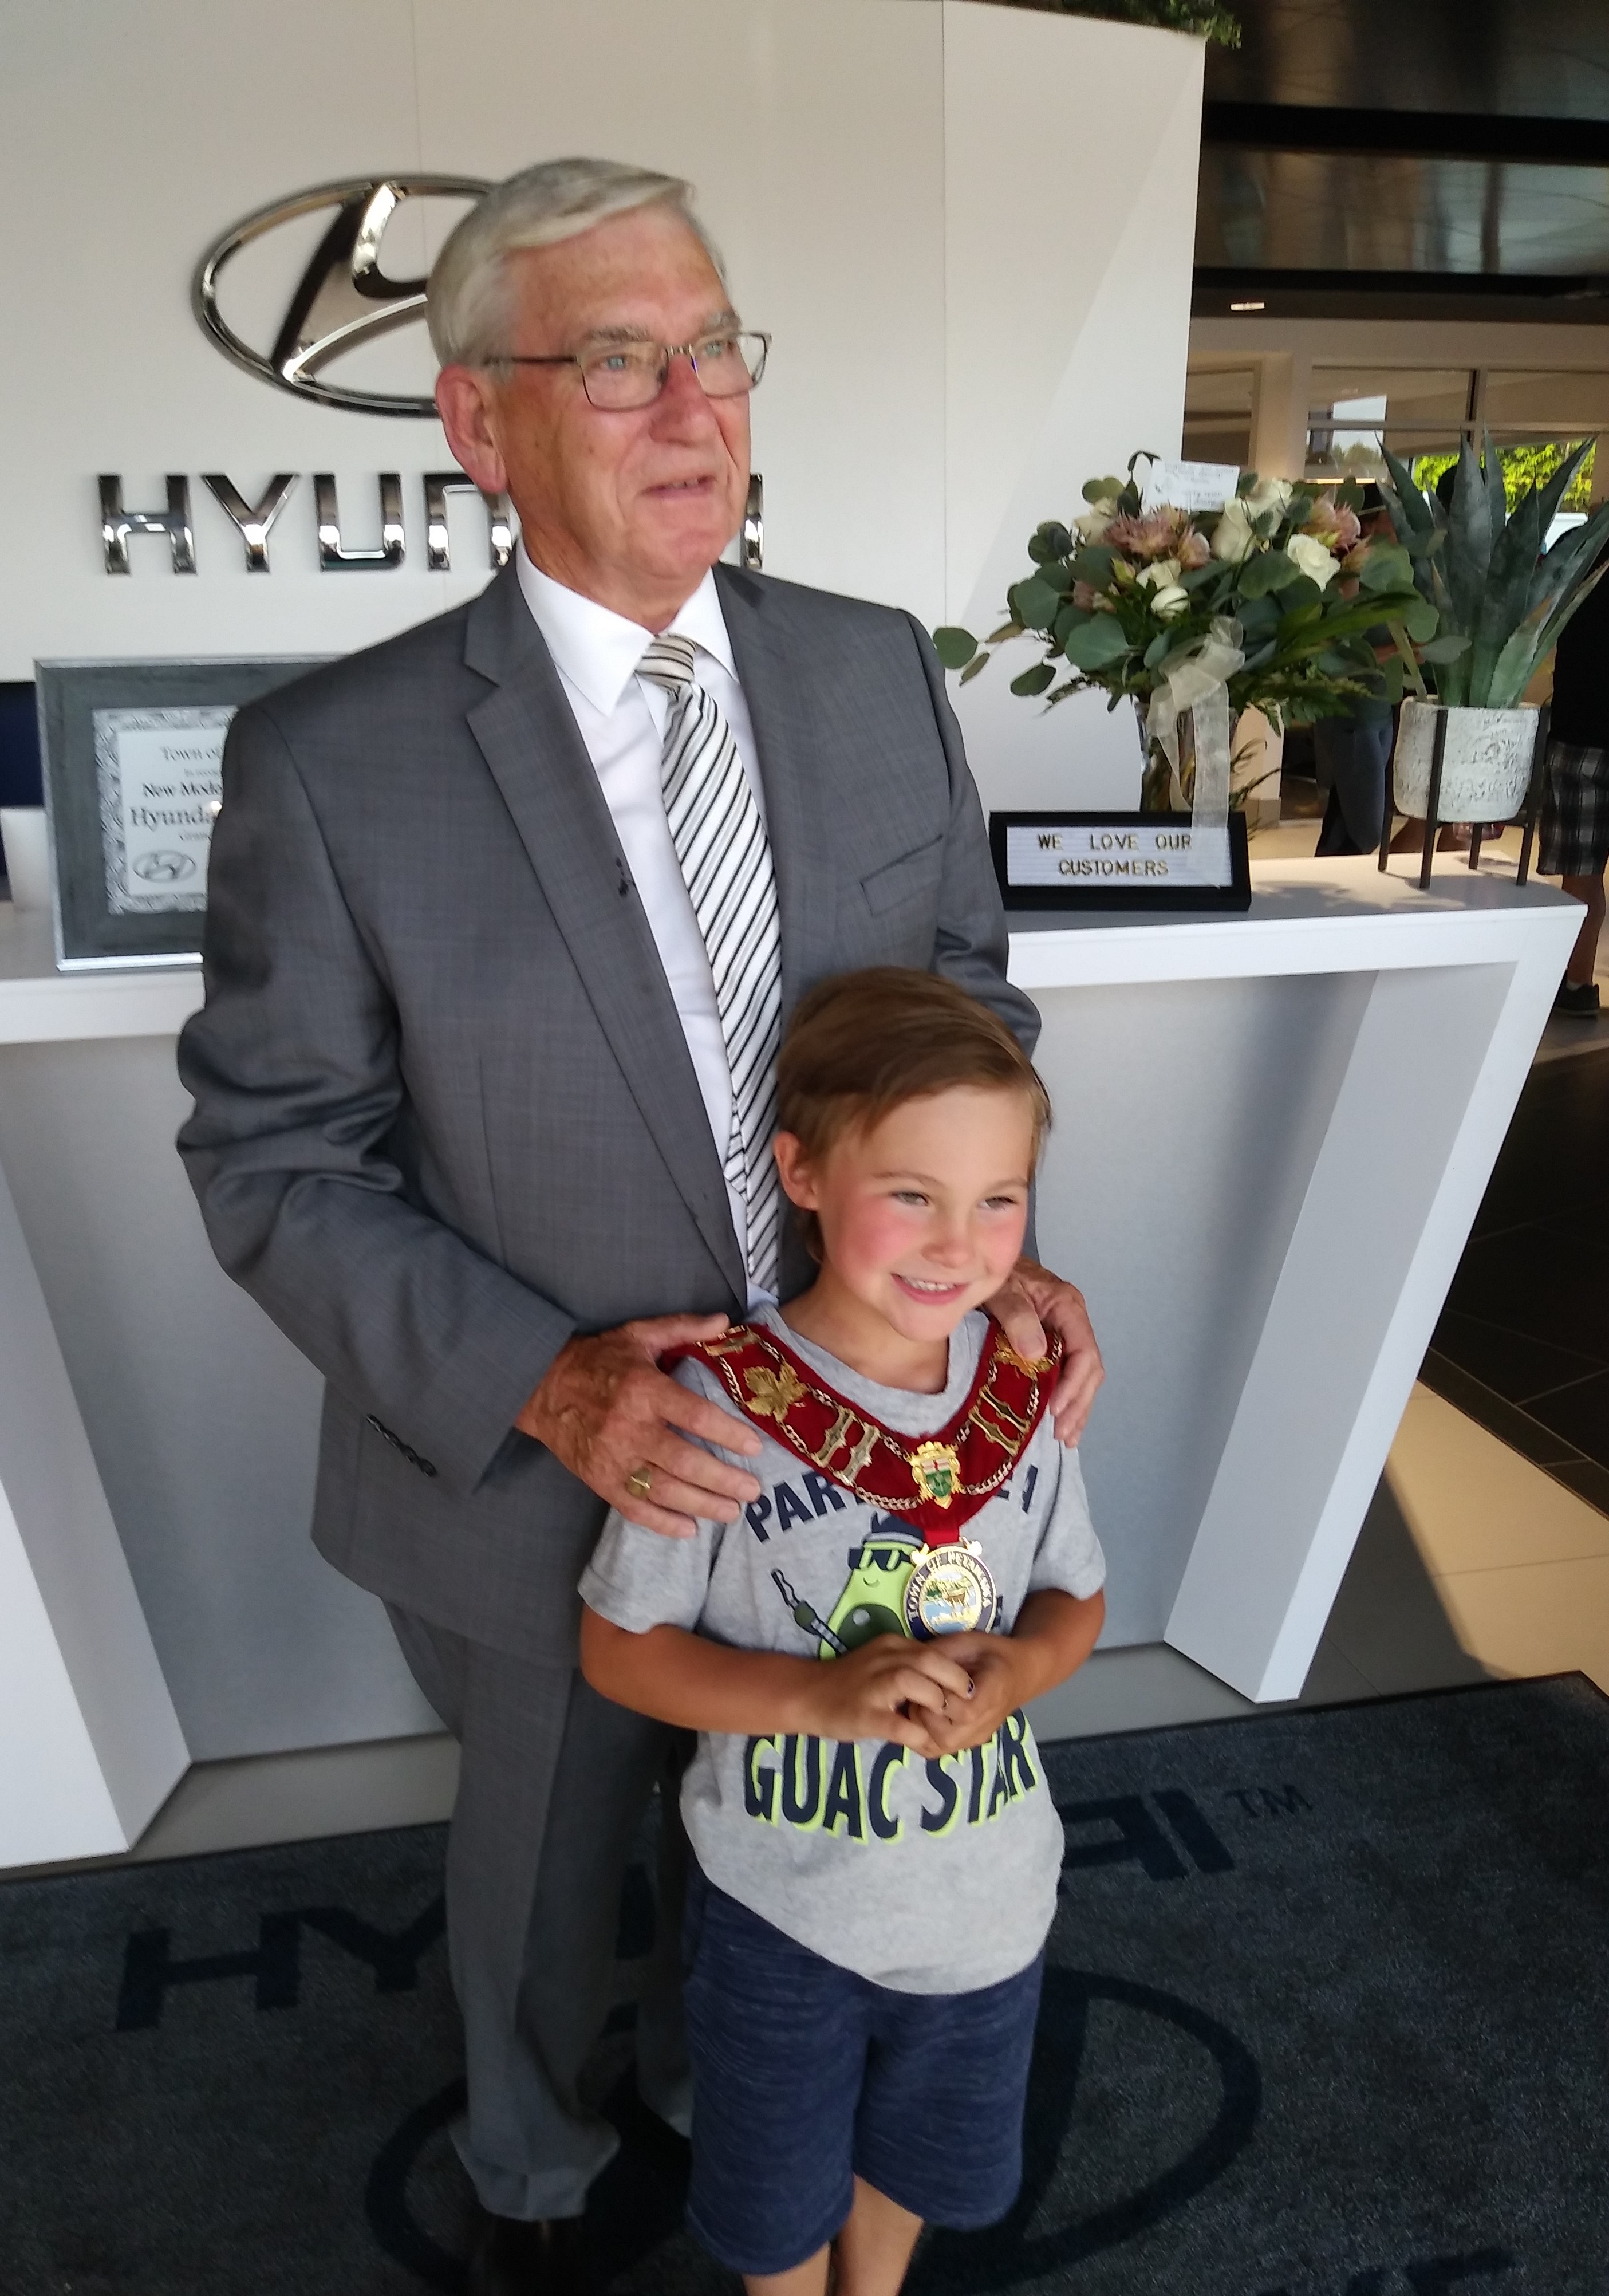 Mayor Sweet with young customer wearing the chain of office